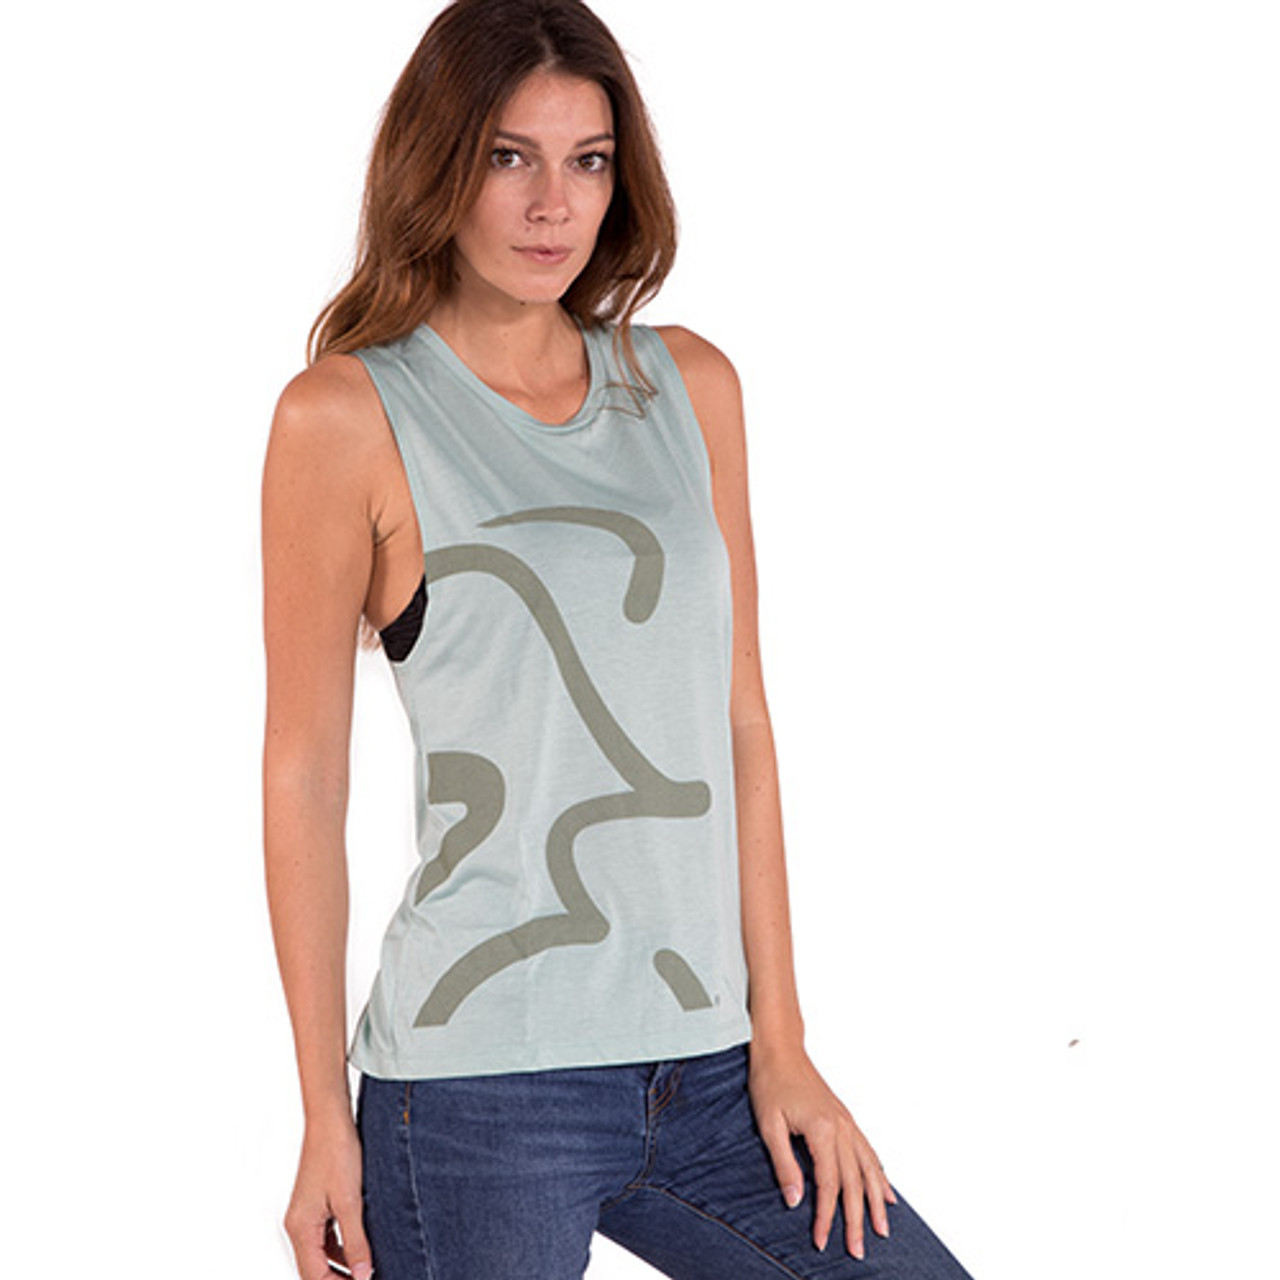 Spinning Muscle Tank Womens